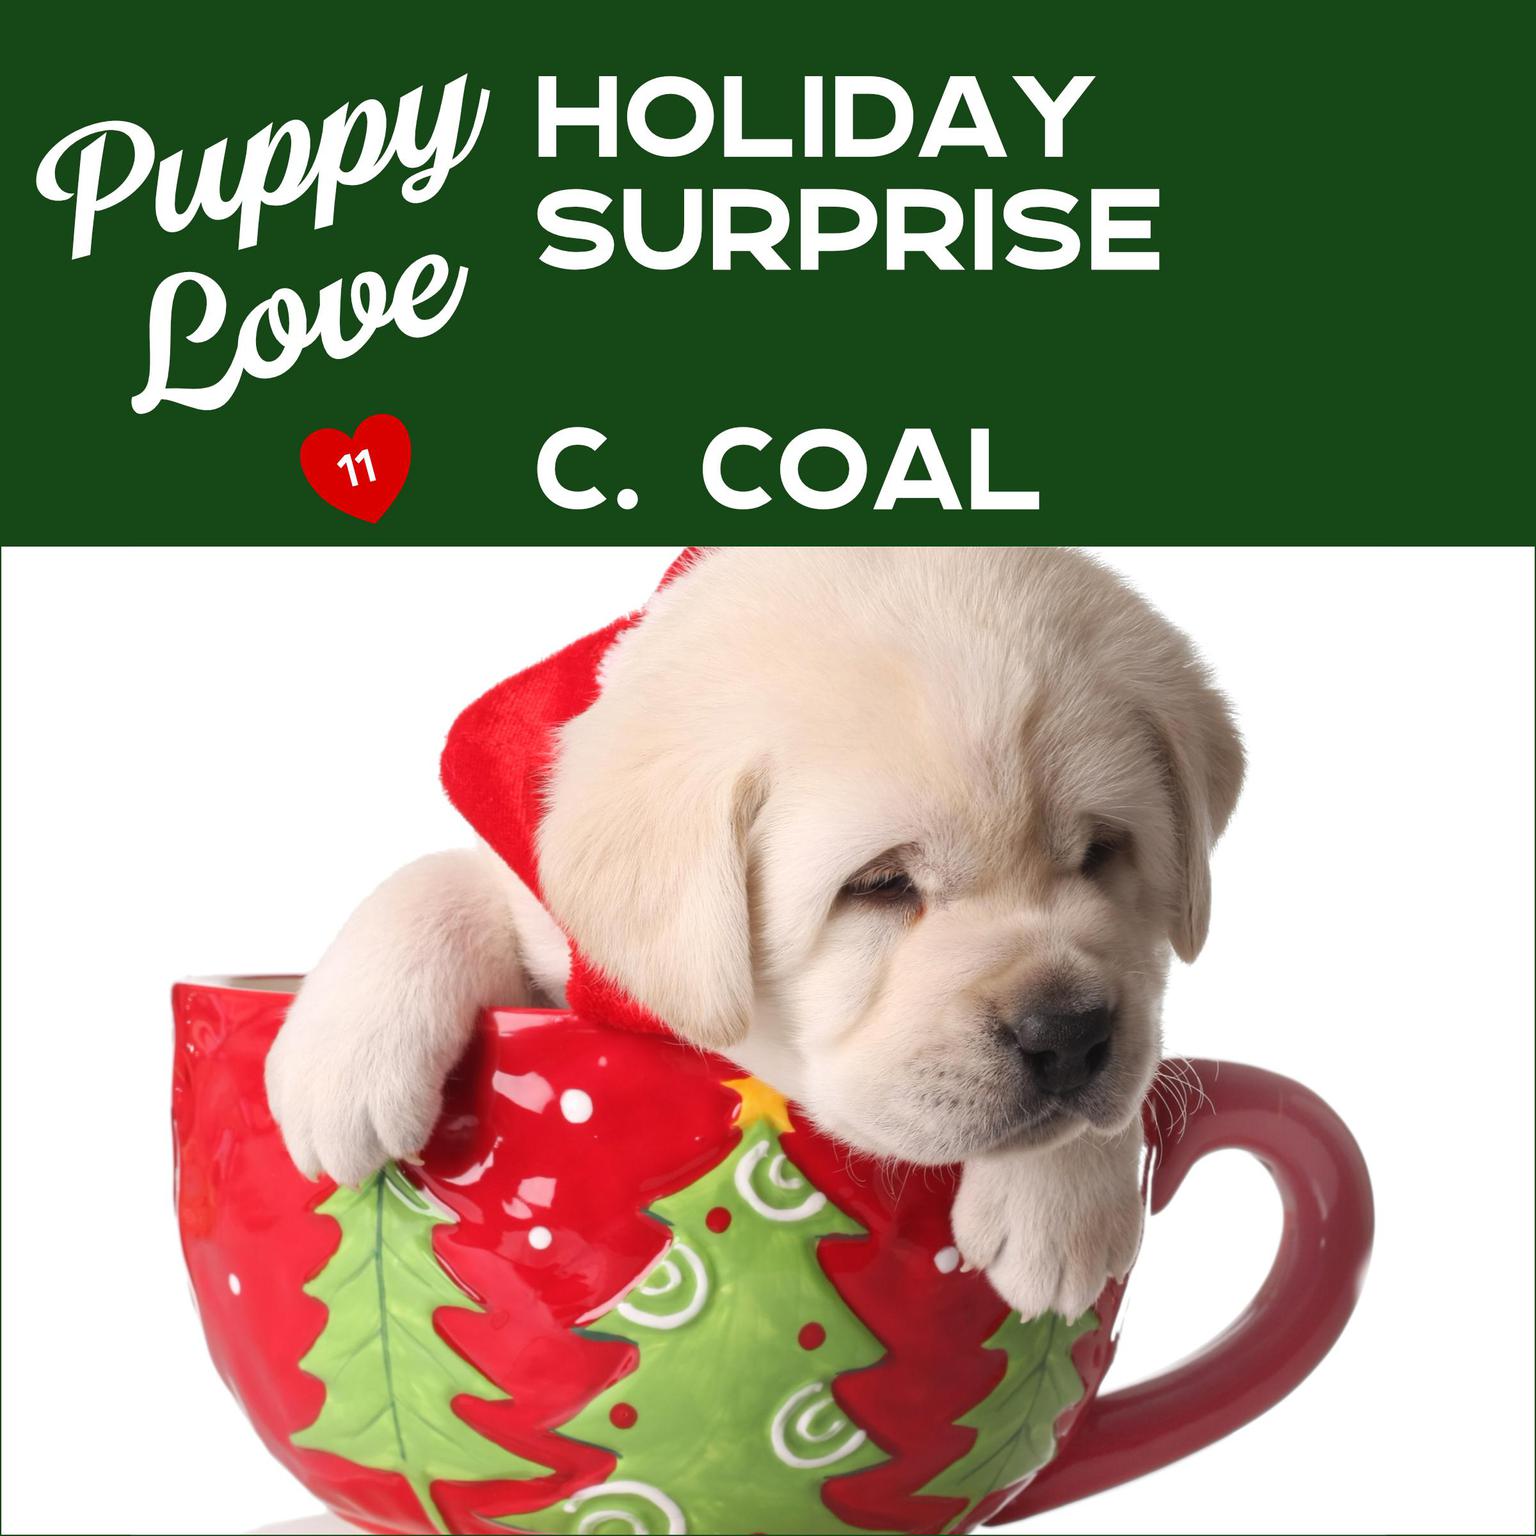 Puppy Love Holiday Surprise Audiobook, by C. Coal